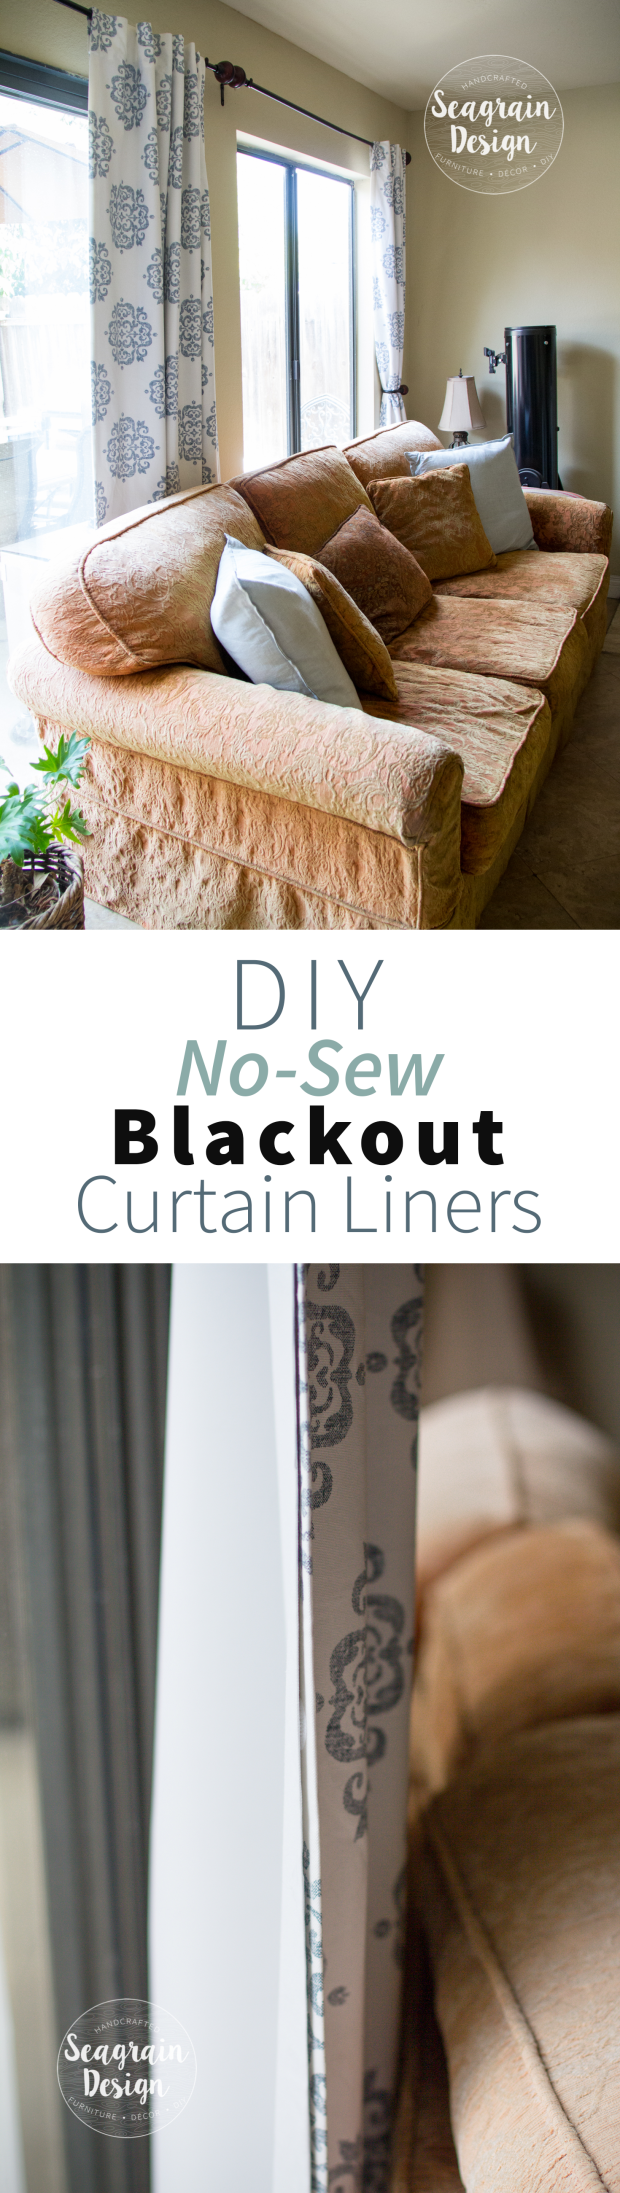 DIY No-Sew Blackout Curtain Liners | A step-by-step tutorial for adding blackout liners to new or existing curtains without sewing. These affordable liners are completely removable so you can still wash the curtains, and cost less than $20 per panel.